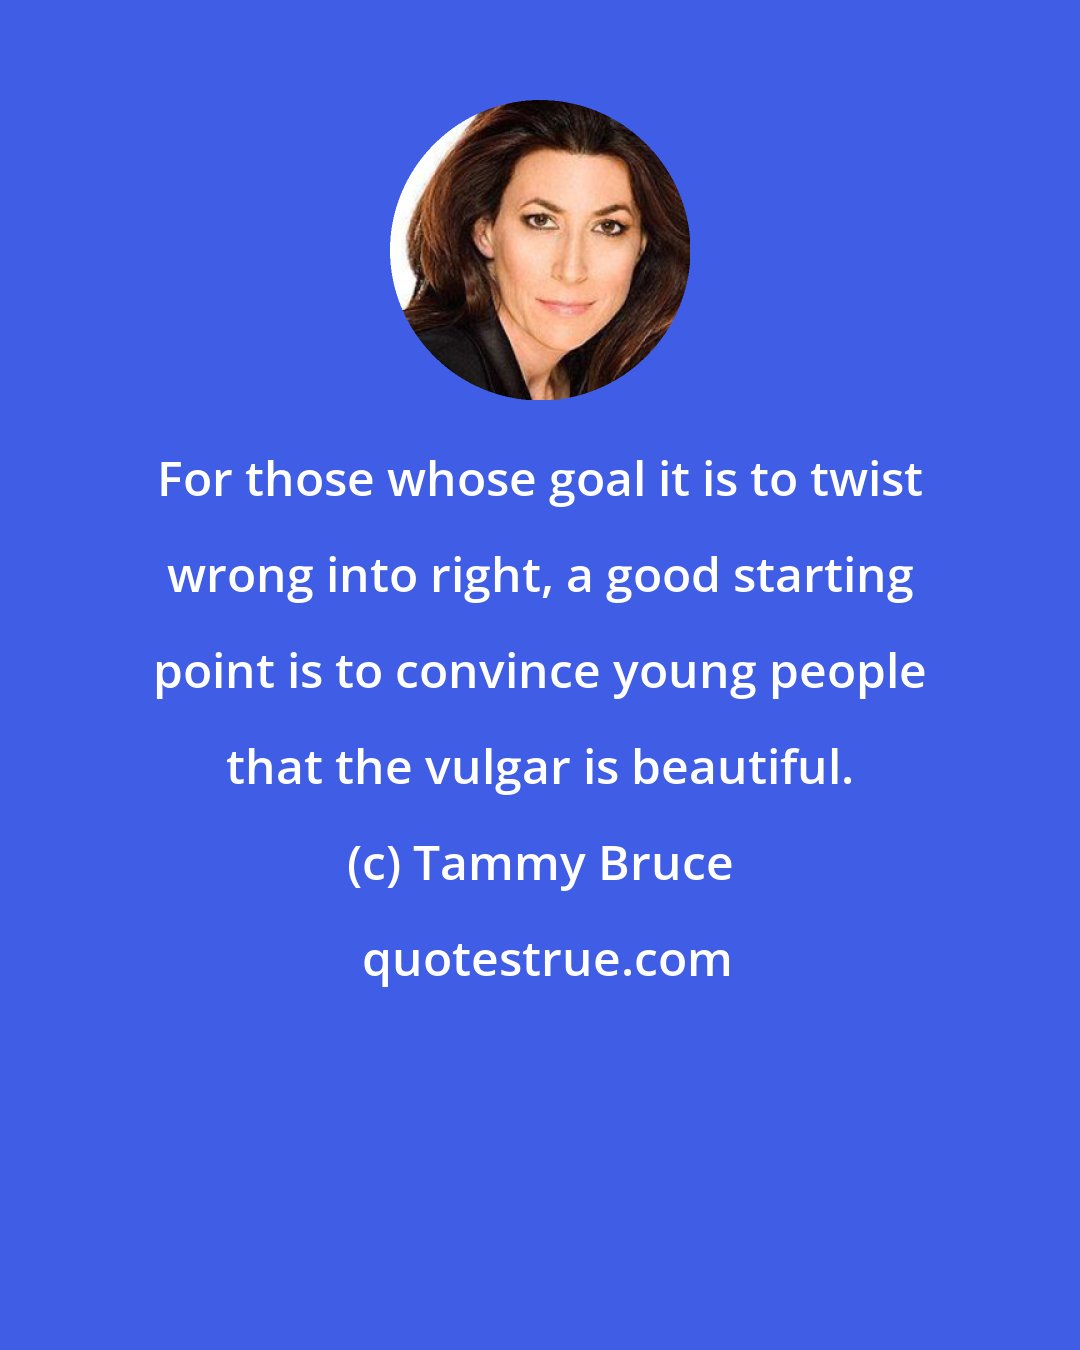 Tammy Bruce: For those whose goal it is to twist wrong into right, a good starting point is to convince young people that the vulgar is beautiful.